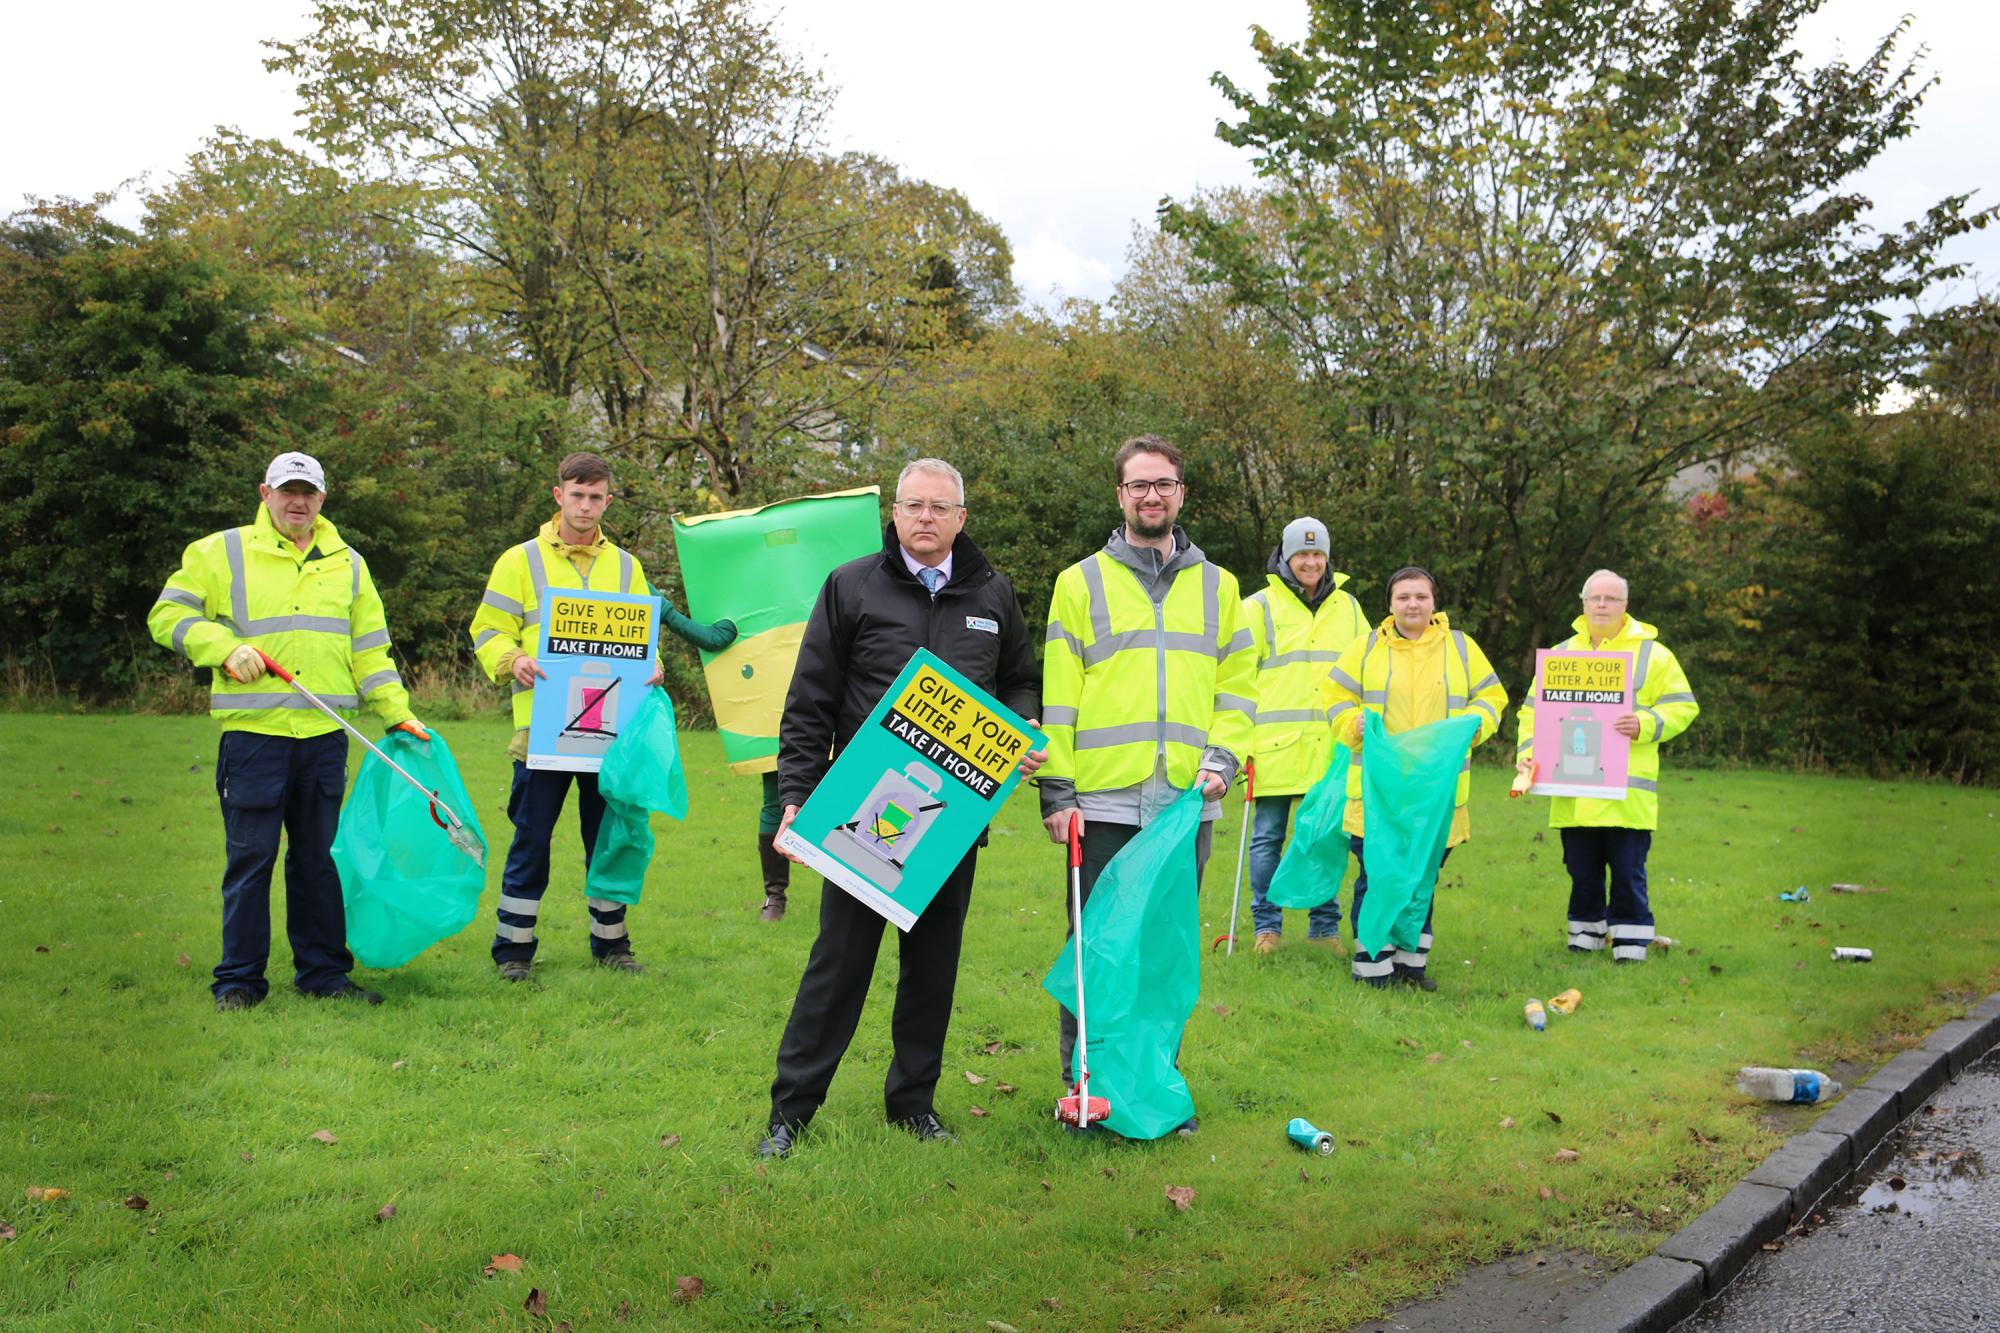 Councillor Paul Ferretti, Convener of the Council’s Place, Neighbourhood and Corporate Assets Committee (centre, on the right) and Barry Fisher, CEO of Keep Scotland Beautiful (centre, left), and are pictured with Thomas McMenamin - Executive Officer Roads and Environment (third from right, back), Council officers and Wido the crisp packet.